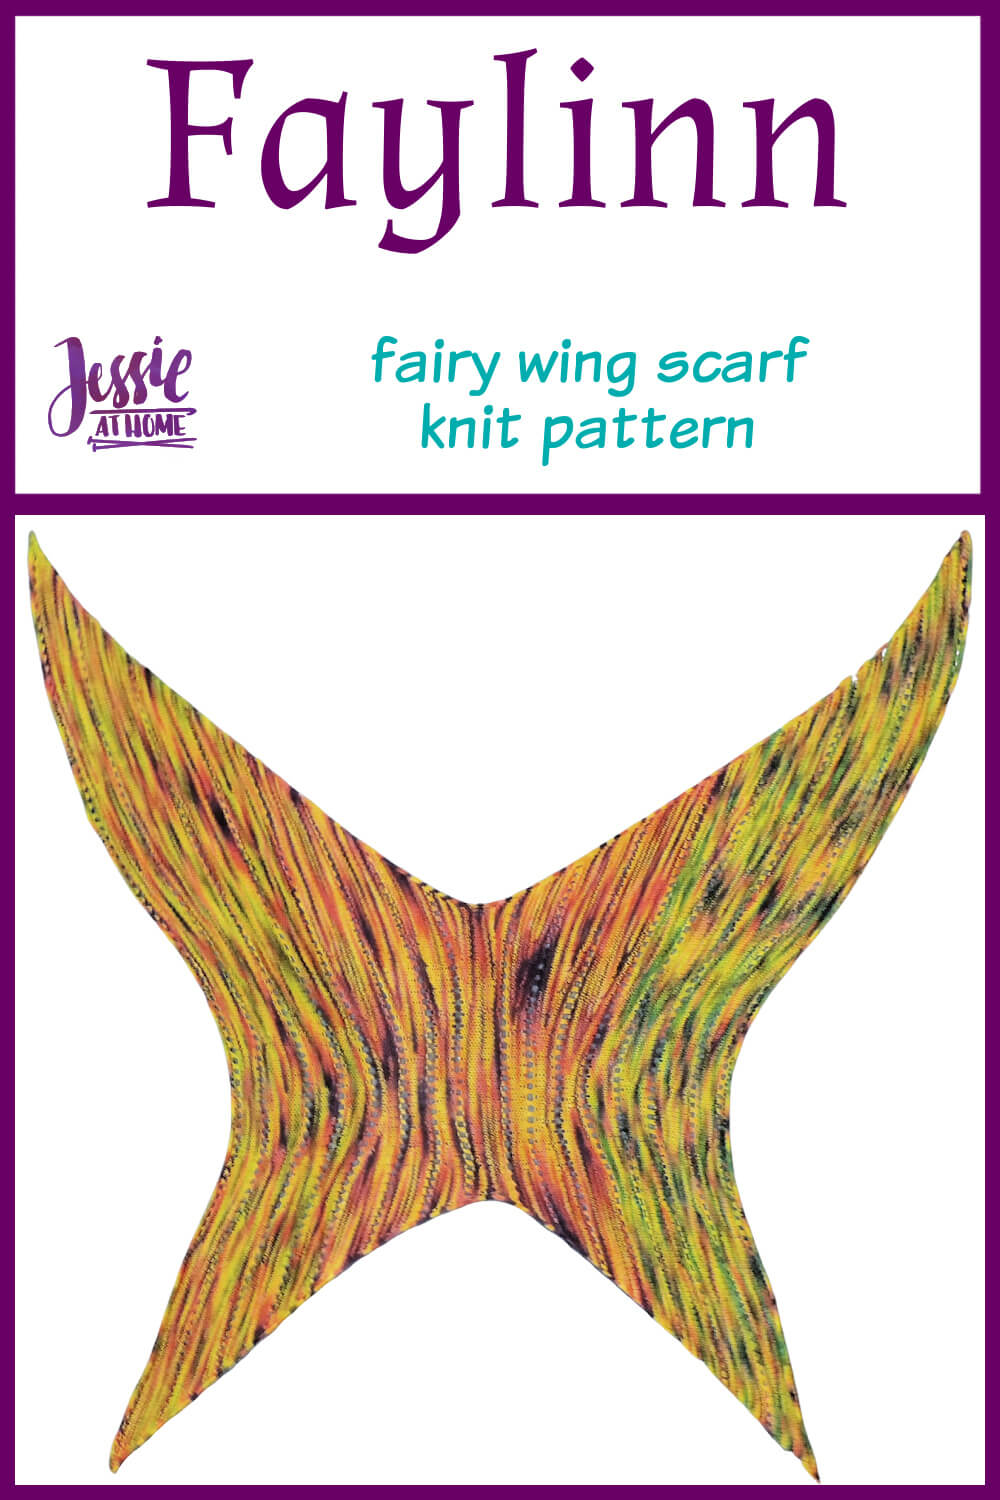 Faylinn - Fairy Wing Scarf Knit Pattern by Jessie At Home - Pin 1